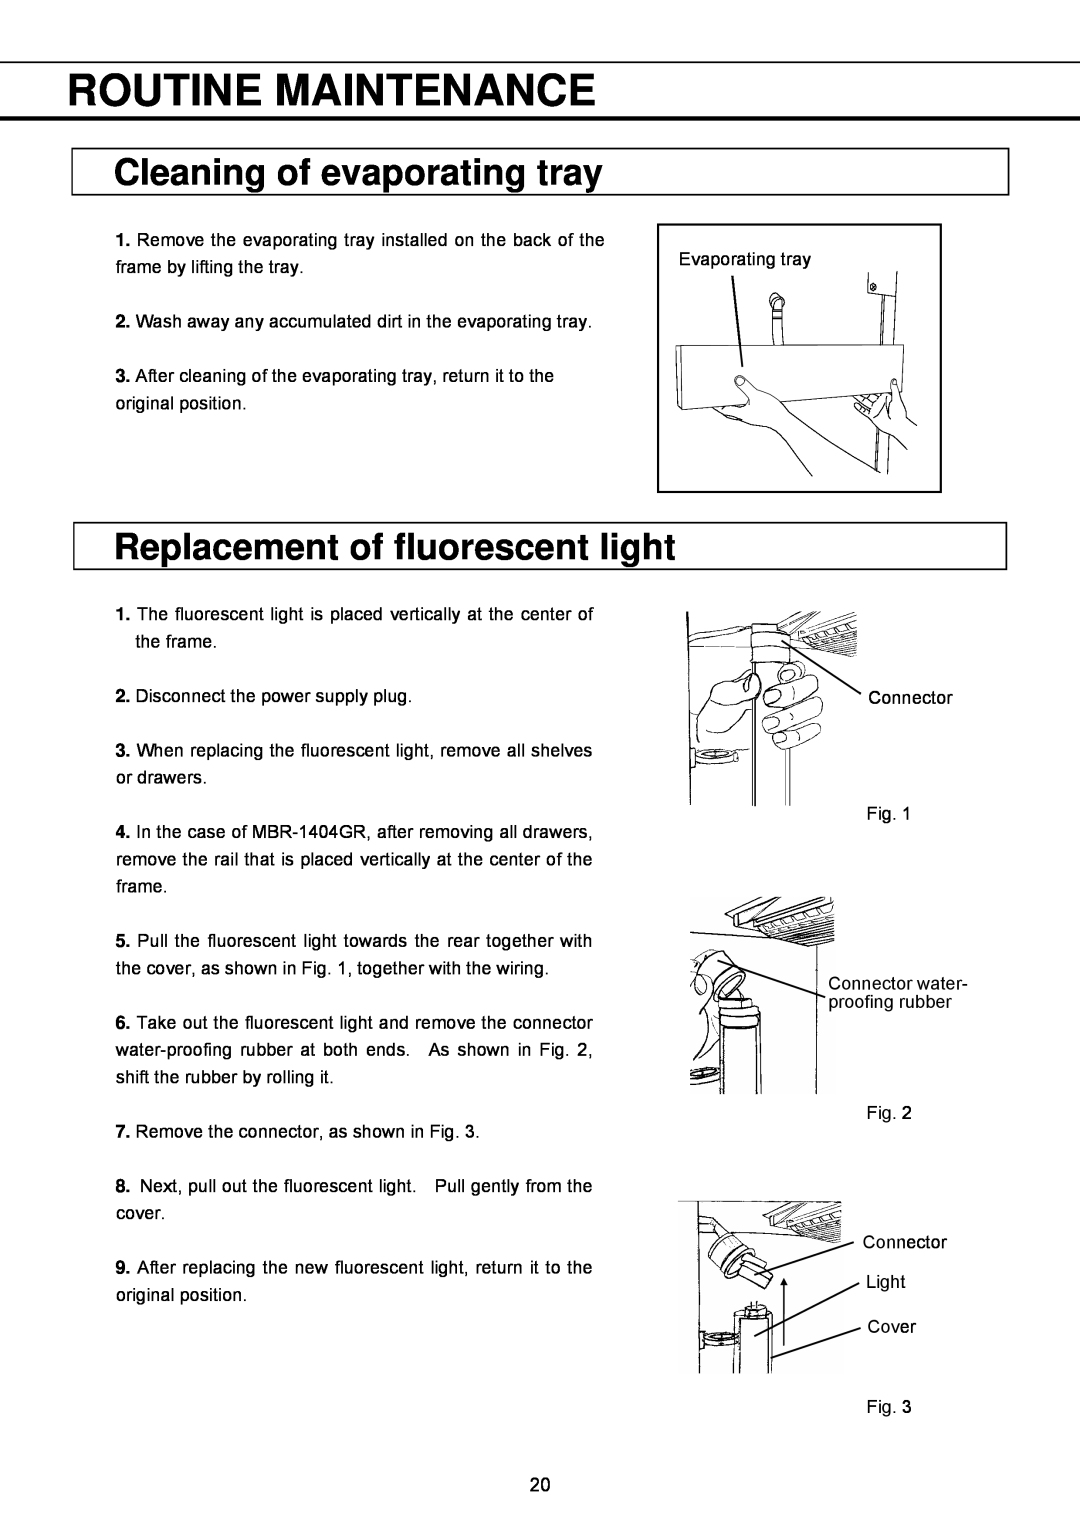 Sanyo MBR-1404GR instruction manual Cleaning of evaporating tray, Replacement of fluorescent light, Routine Maintenance 